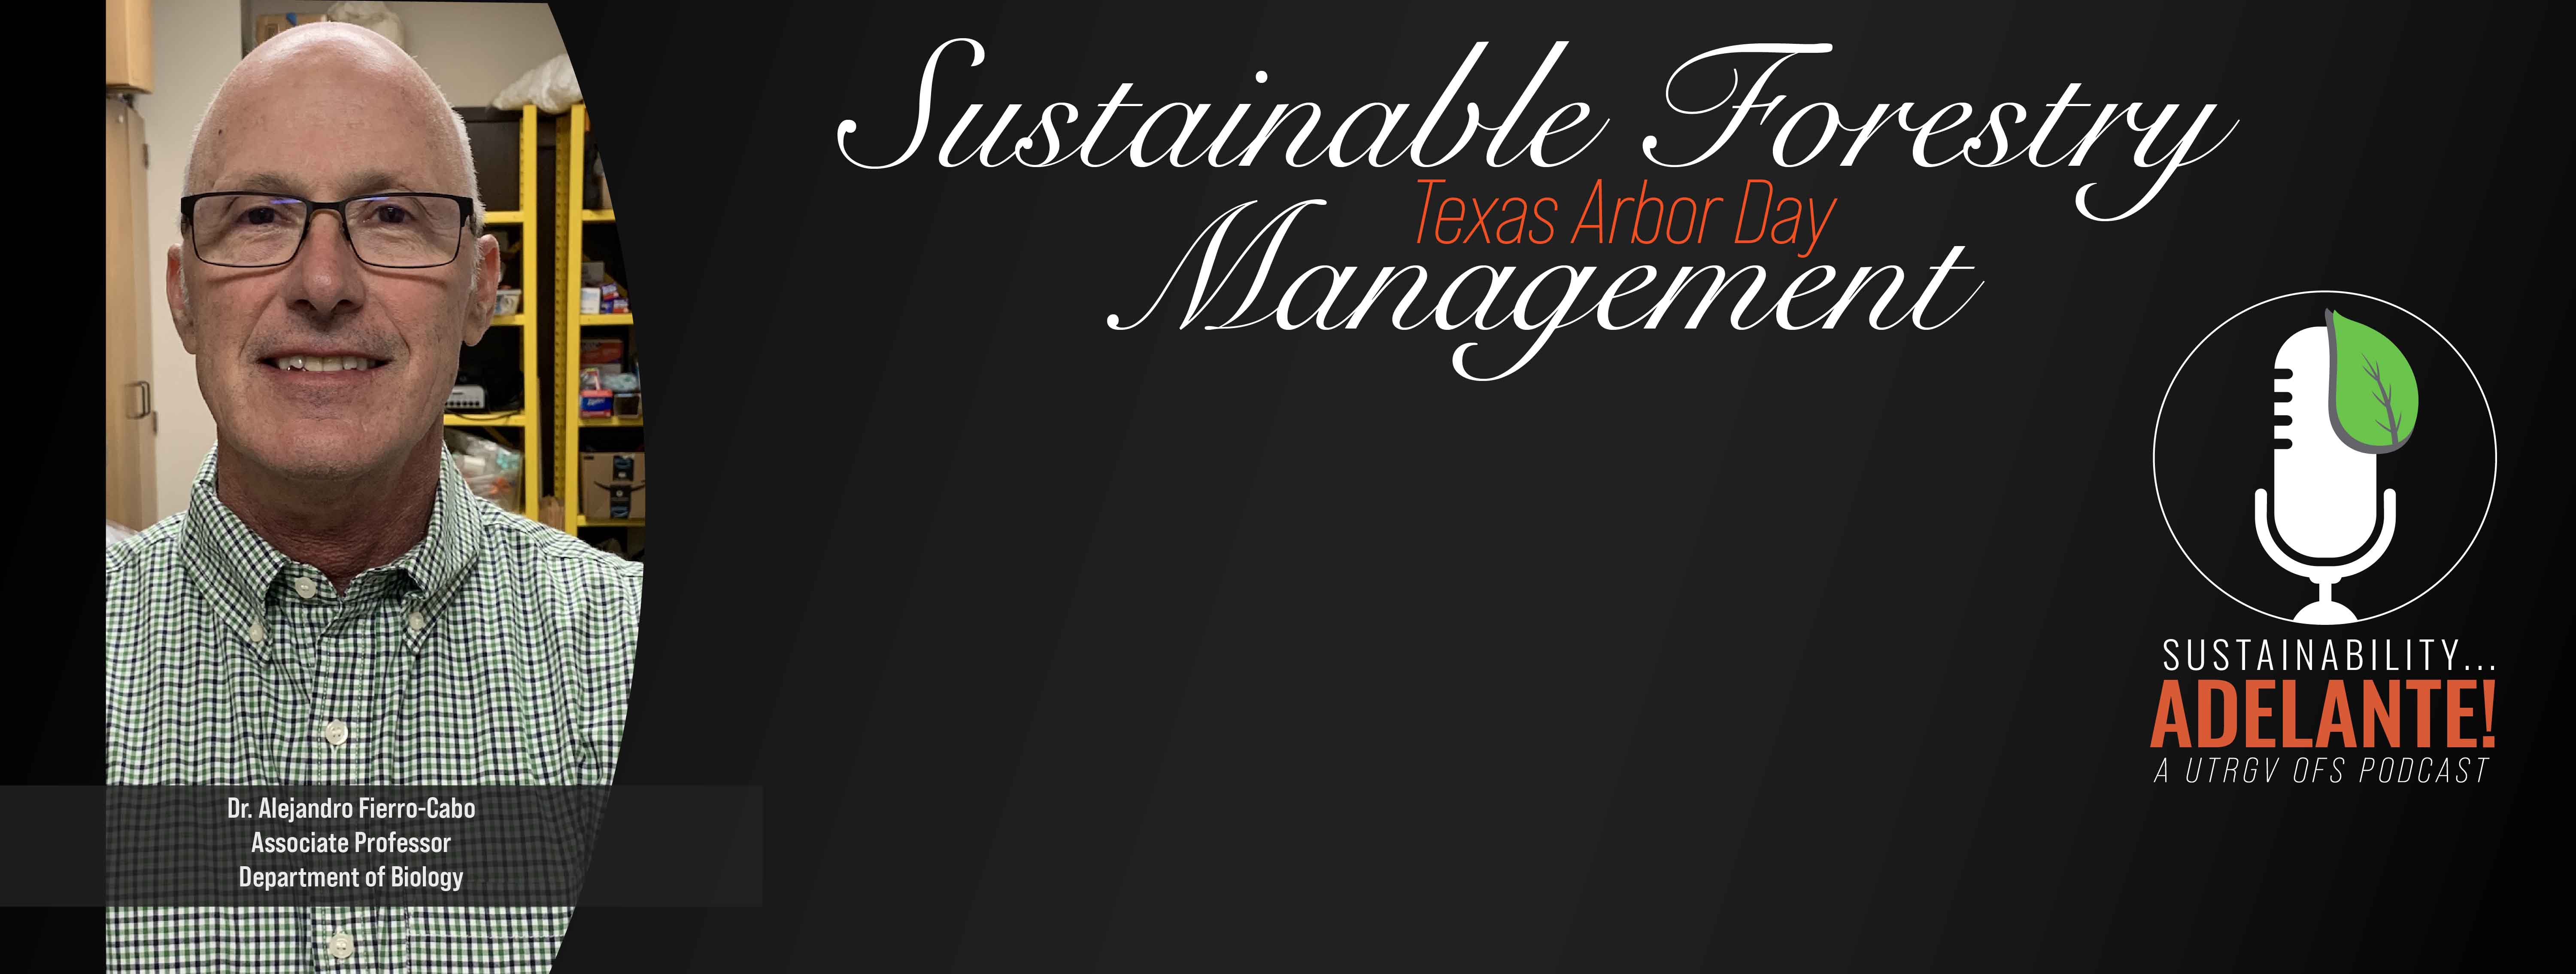 Sustainable Forestry Texas Arbor Day Management Dr. Cabo Assistant Professor Department of Biology Sustainability Adelante! A UTRGV OFS Podcast